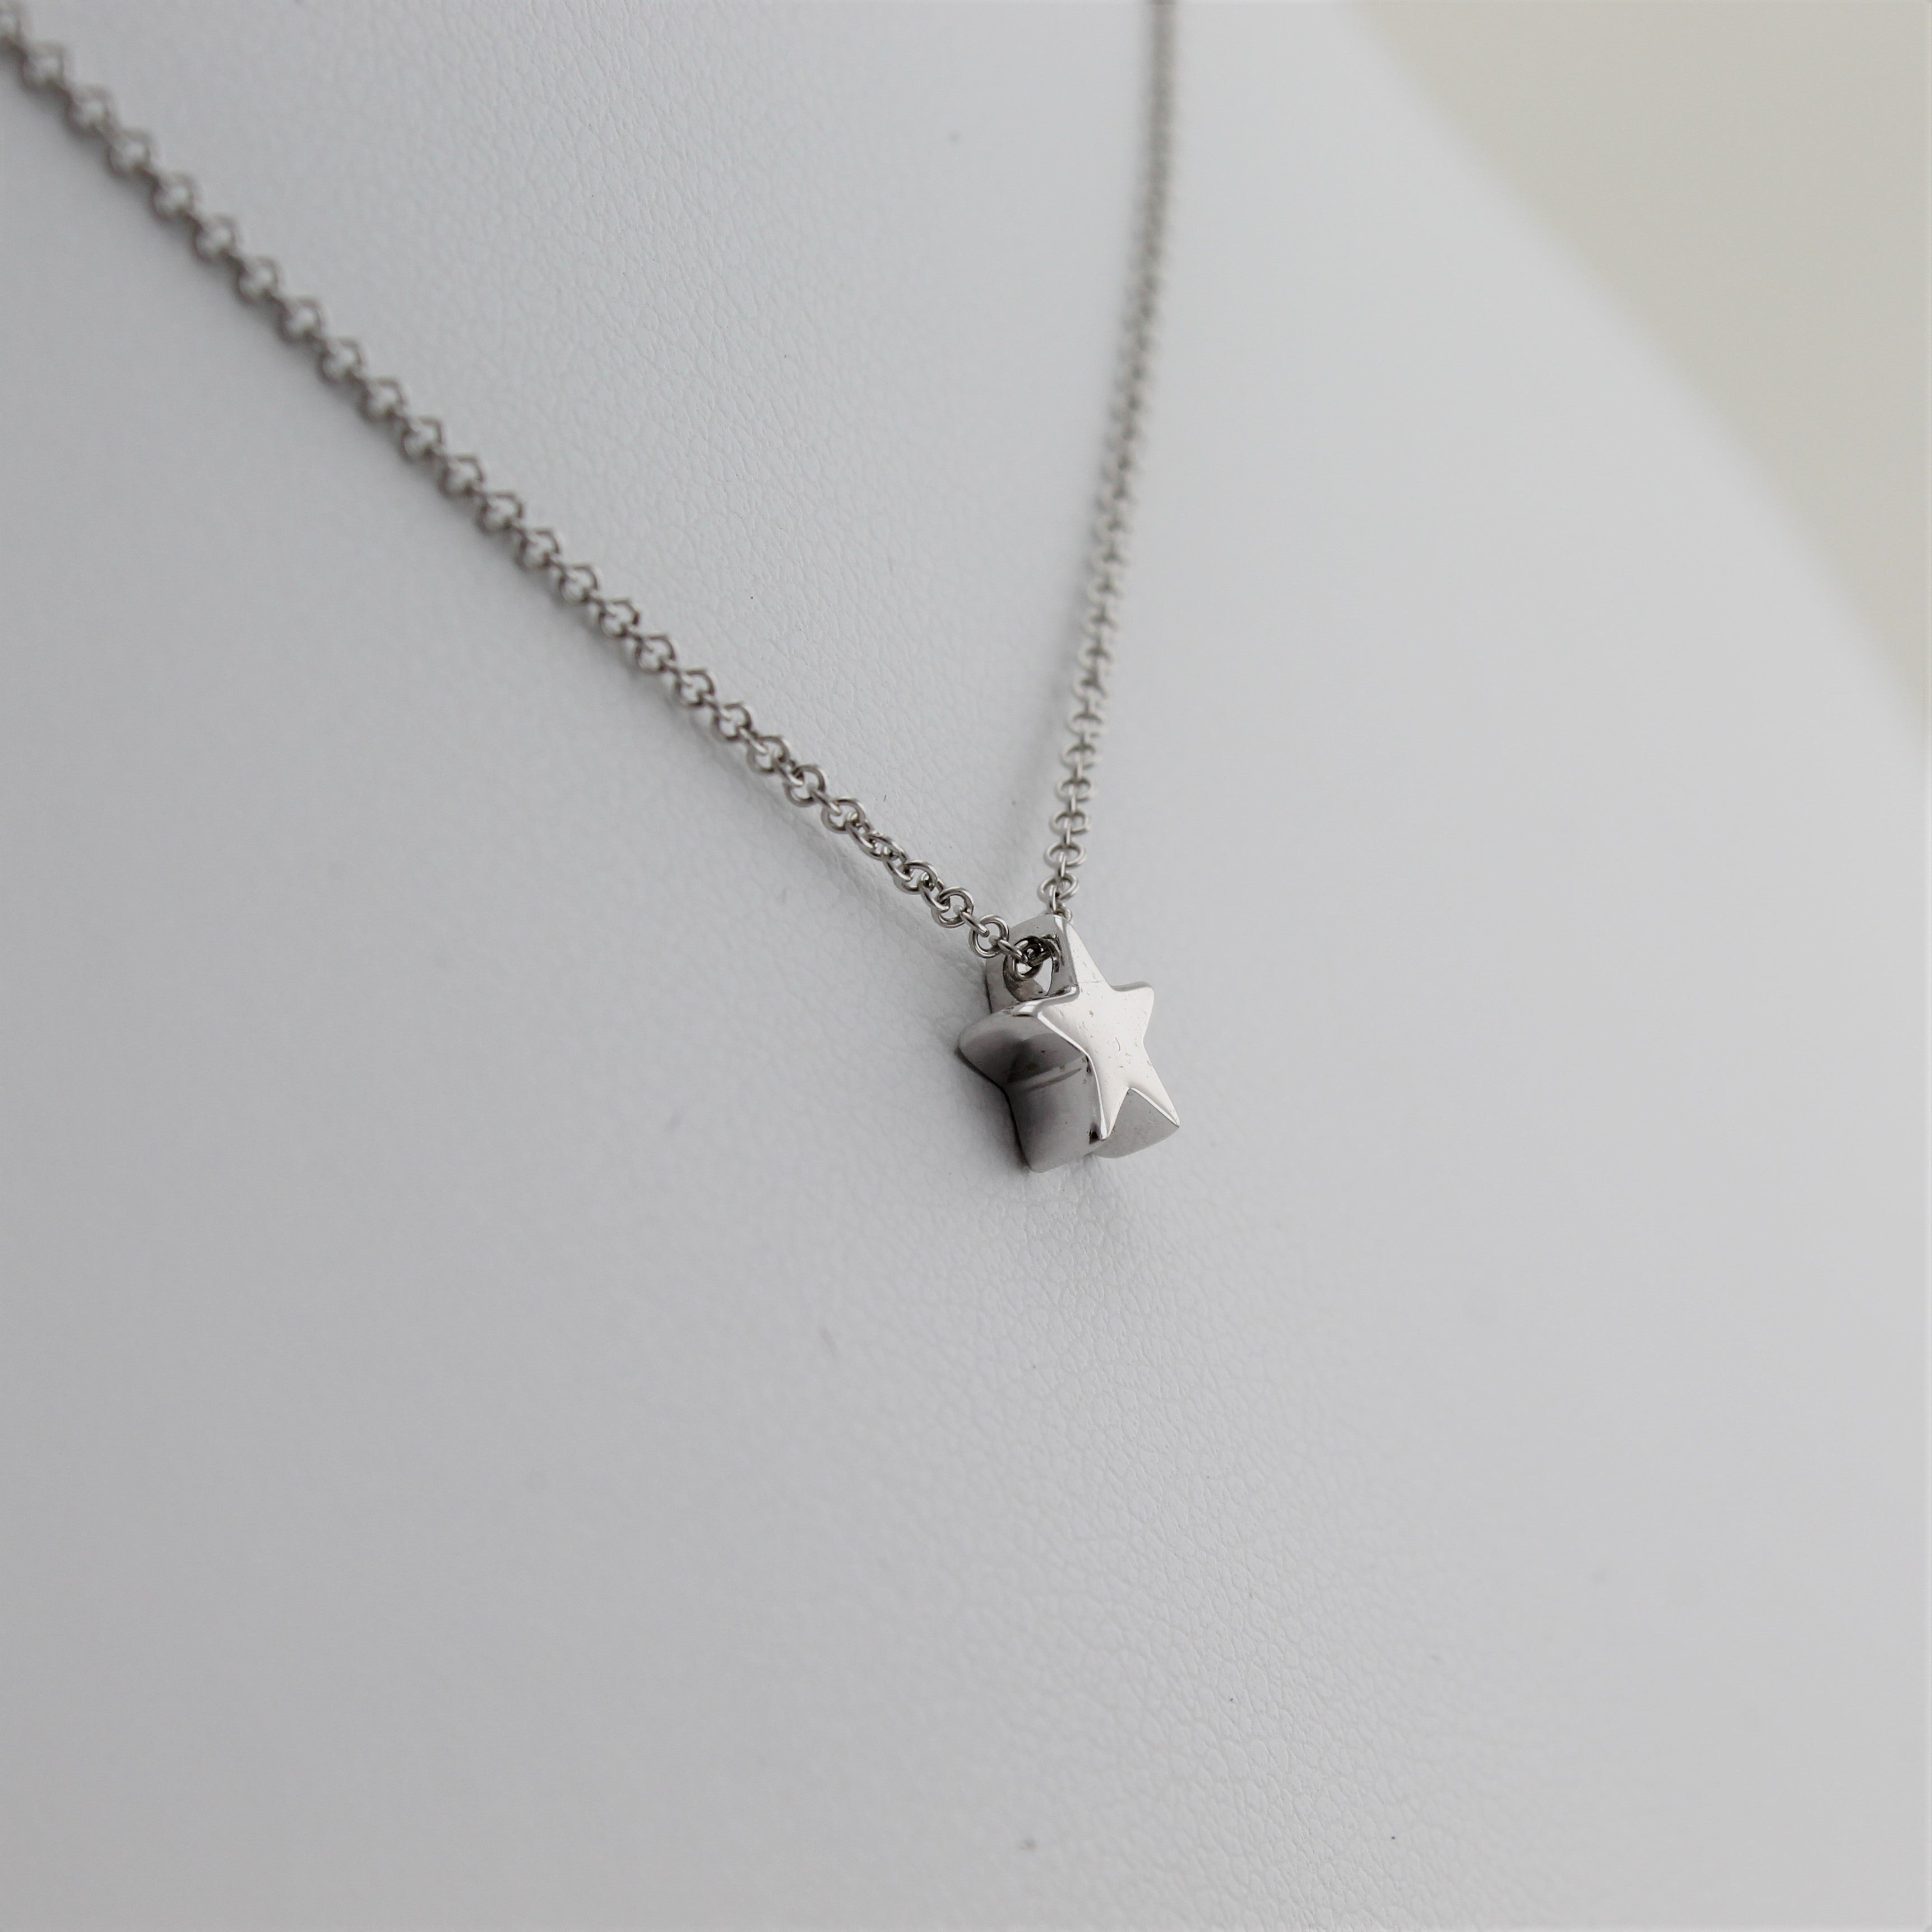 14k White Gold Shining Star Pendant, close-up left angle view of necklace highlighting the dainty star pendant.